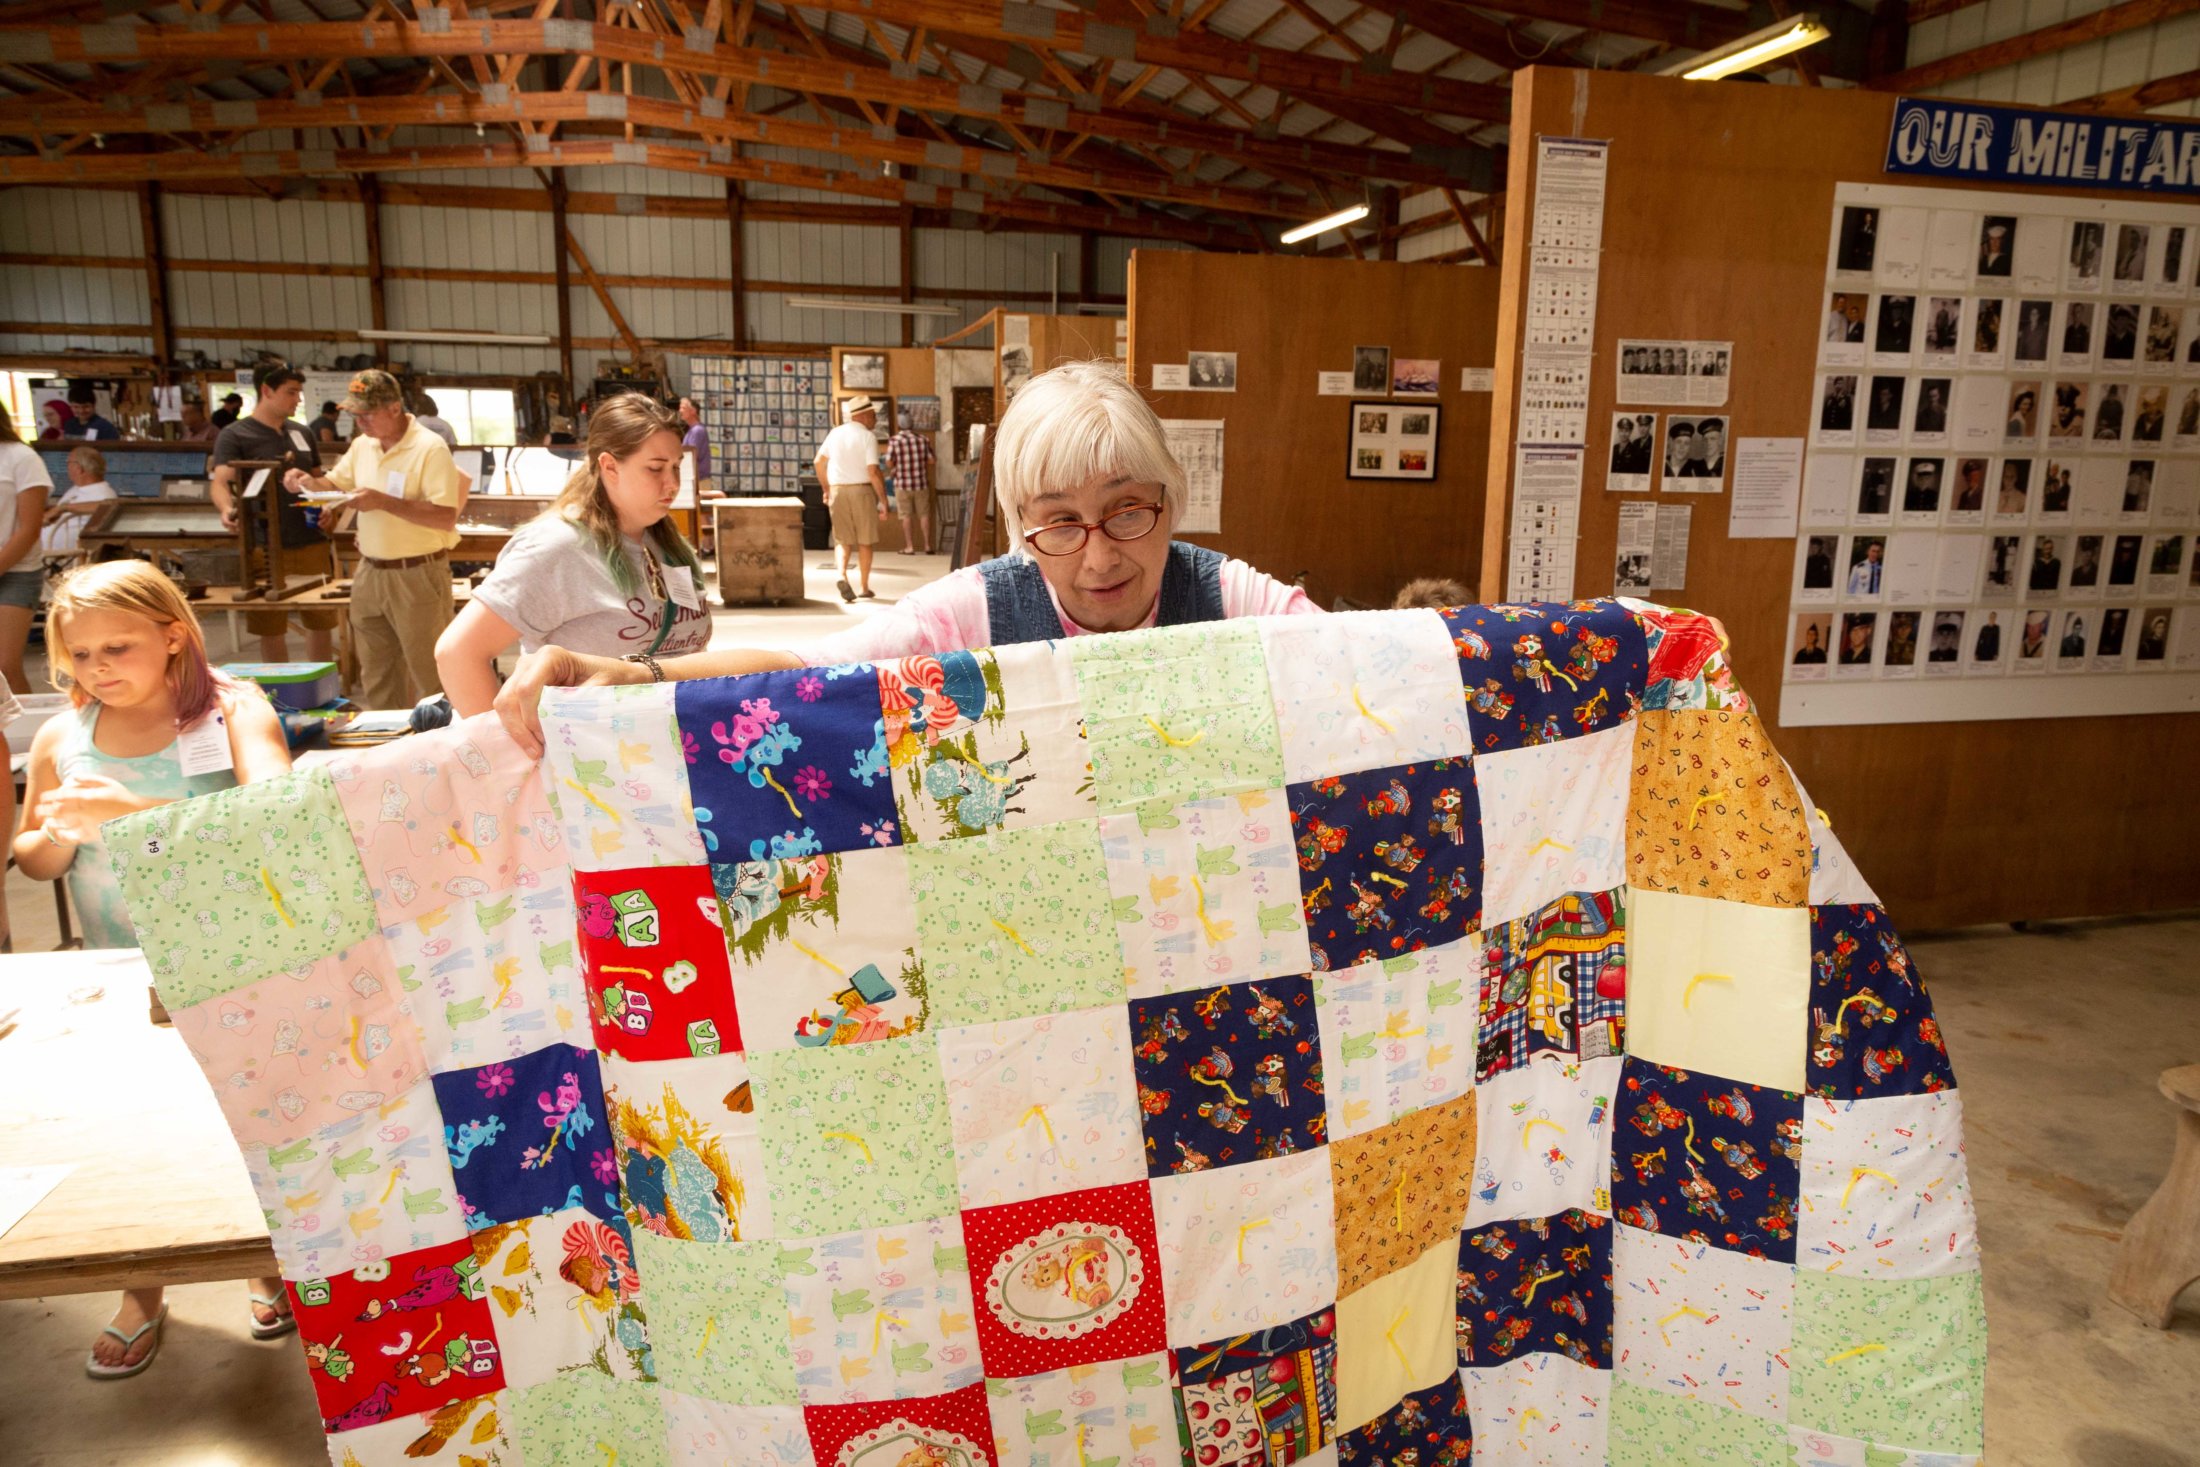 One Nice Quilt For The Silent Auction